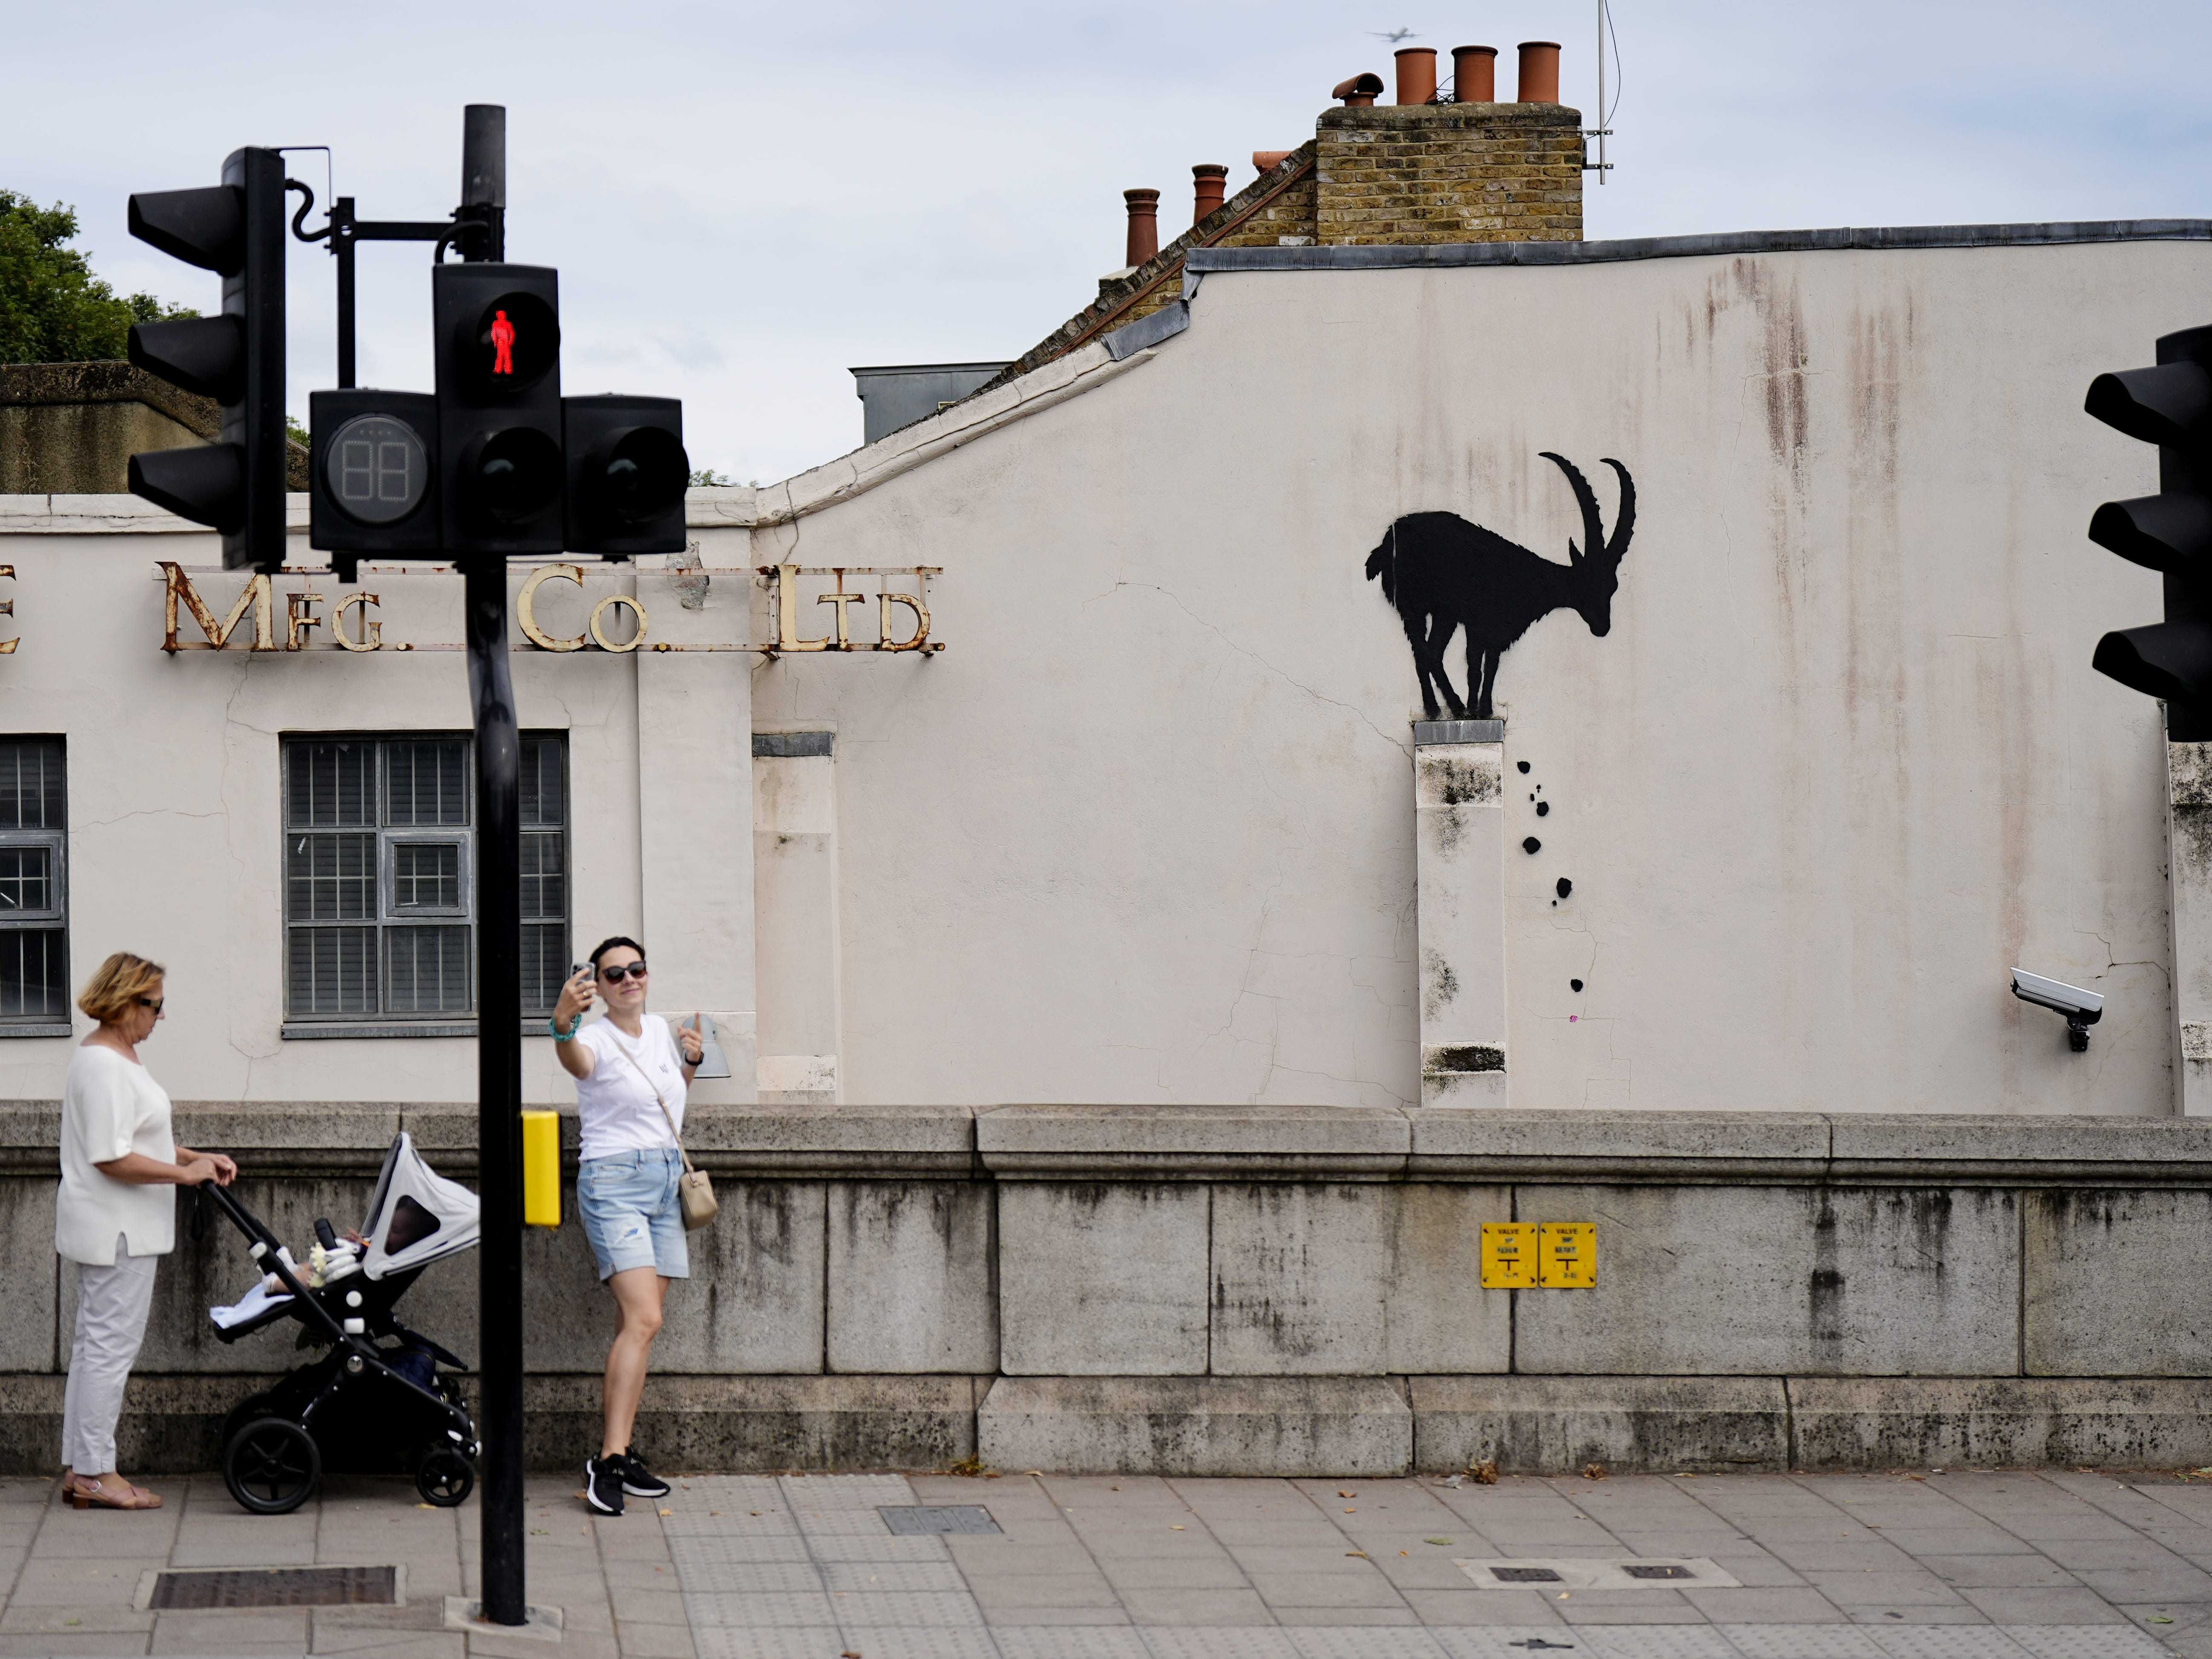 Banksy reveals new London artwork of goat perched on a wall